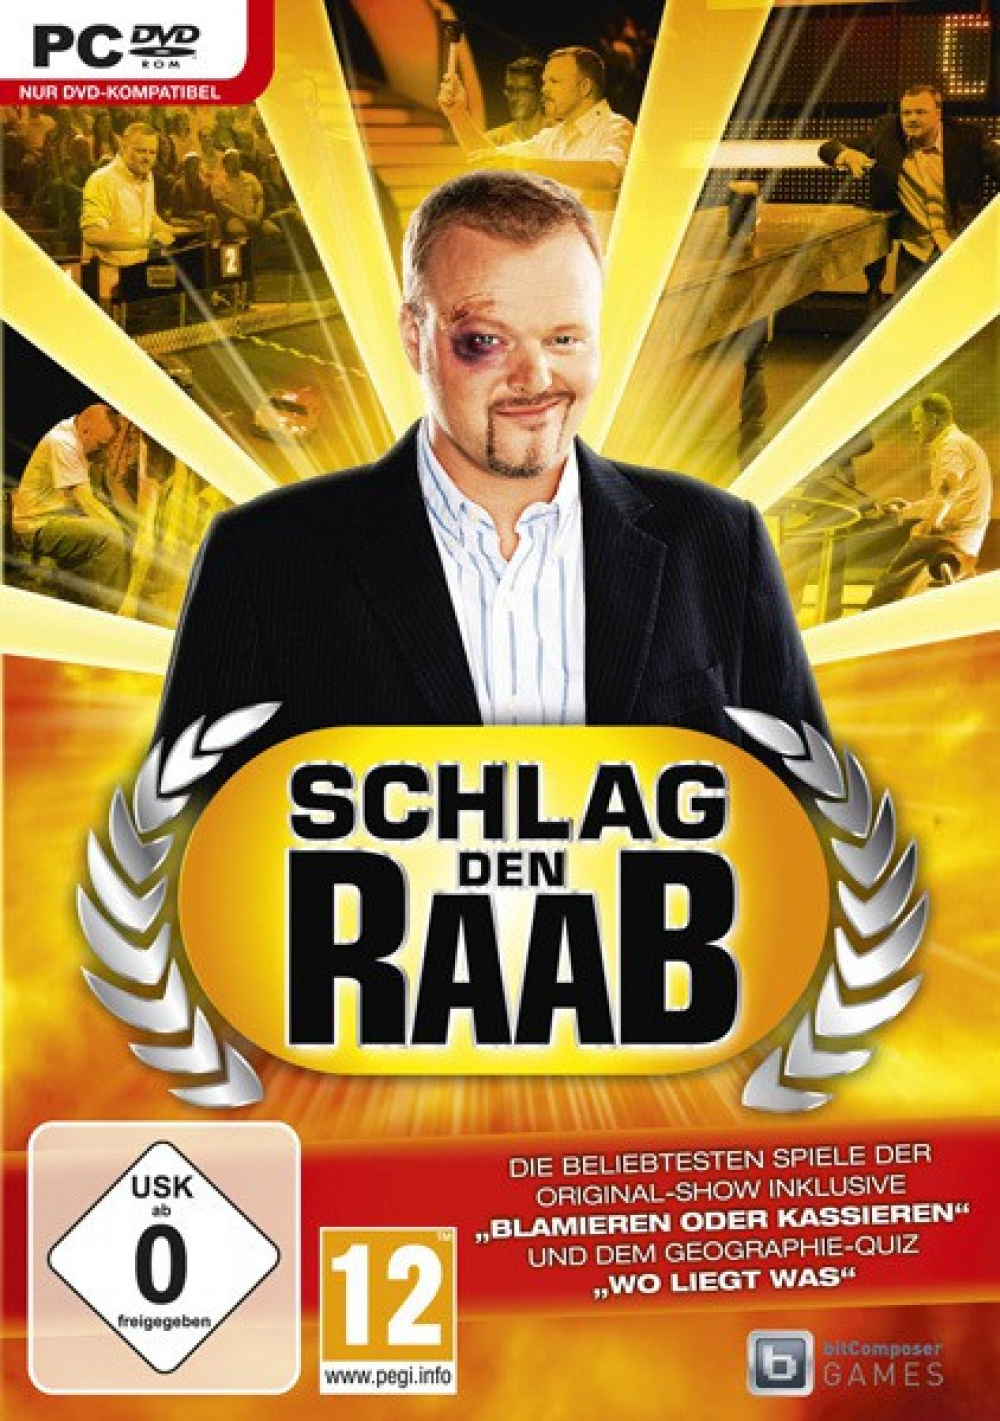 den Schlag Das mobile Xbox and 3. Raab Video PS4, | One Spiel Game and PC, Reviews Previews –